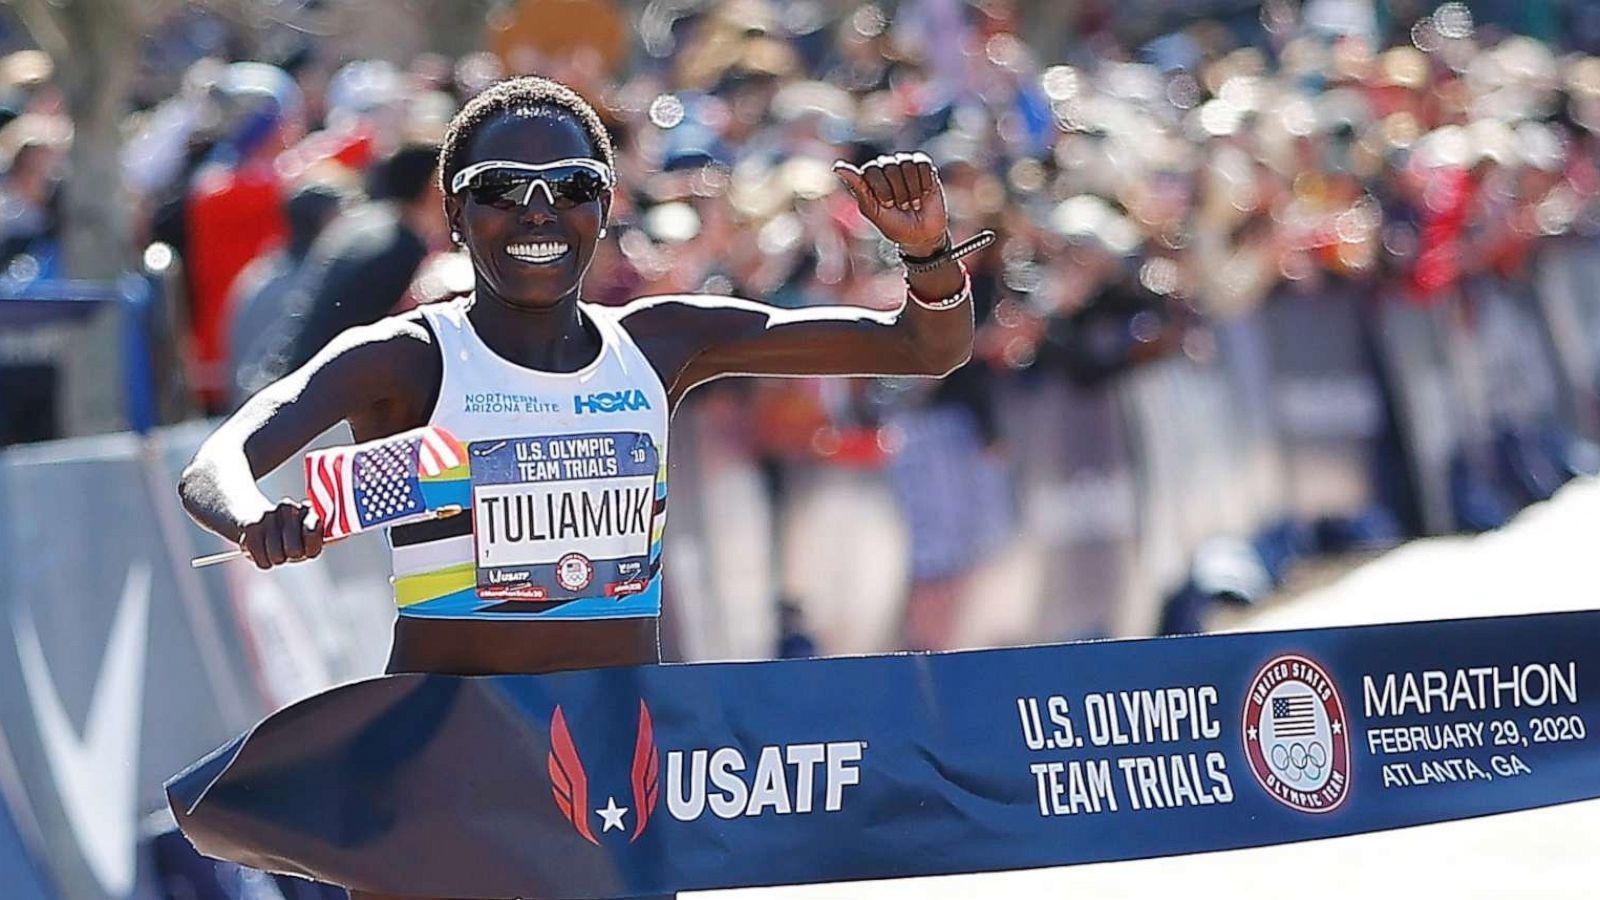 U.S. Olympic Marathon Trials winner Aliphine Tuliamuk will be the first elite female athlete to receive financial assistance as she recovers from childbirth and trains for the 2021 Olympics